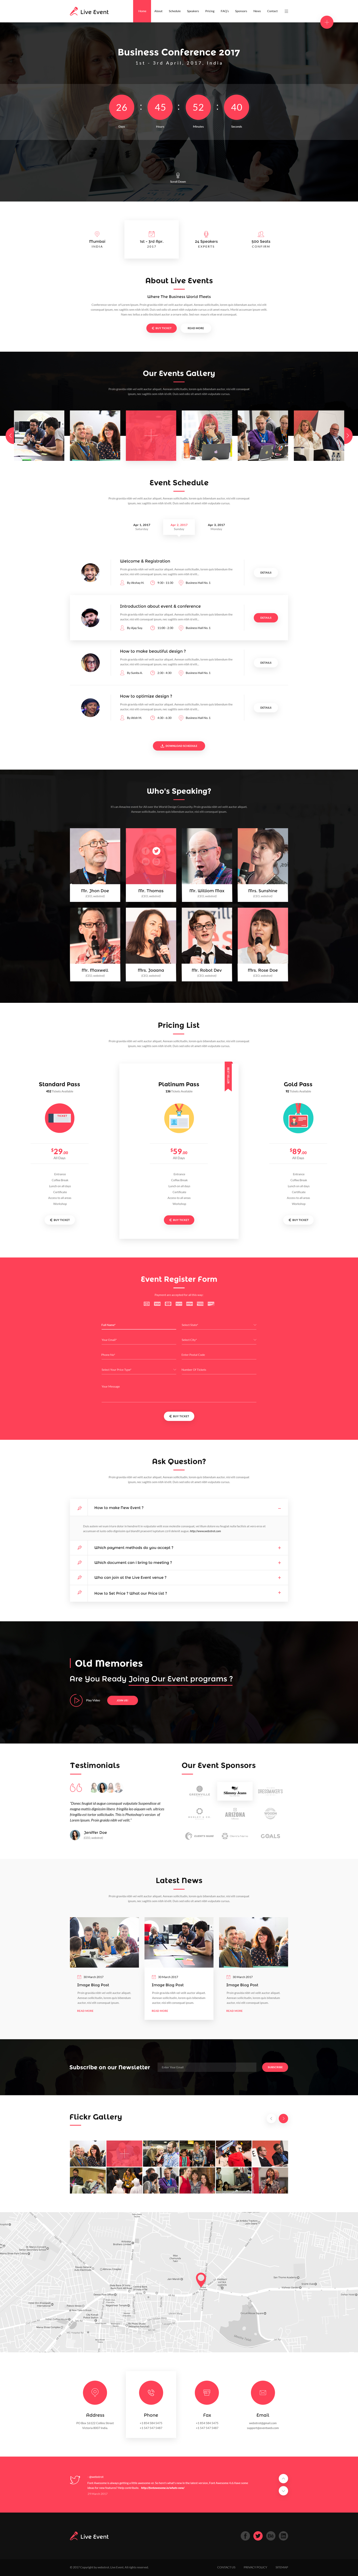 Live Event - Conference, Event & Meetup PSD Template 